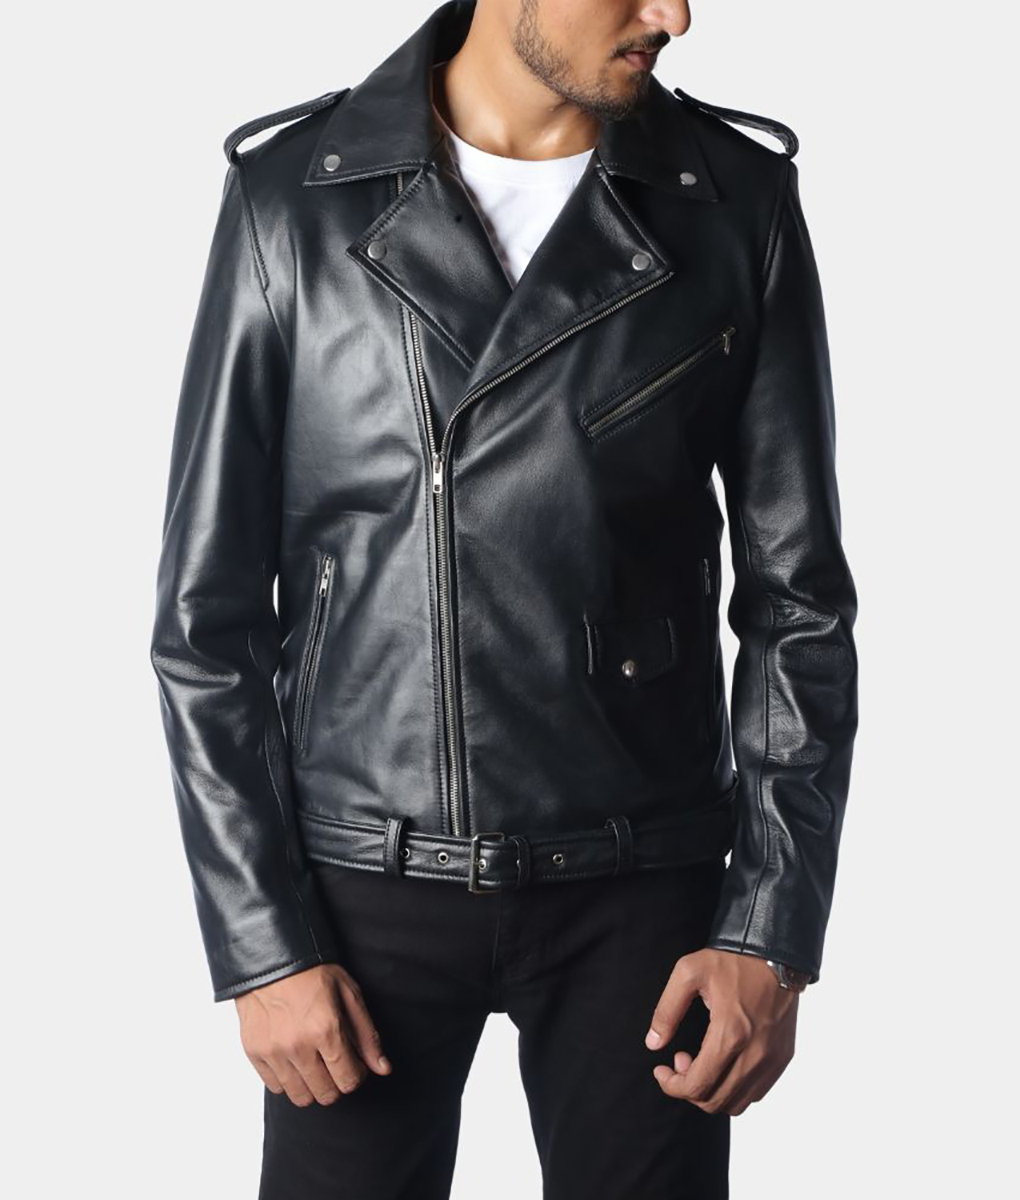 Arctic Monkeys Leather Jacket - One For the Road Jacket | The Leather City